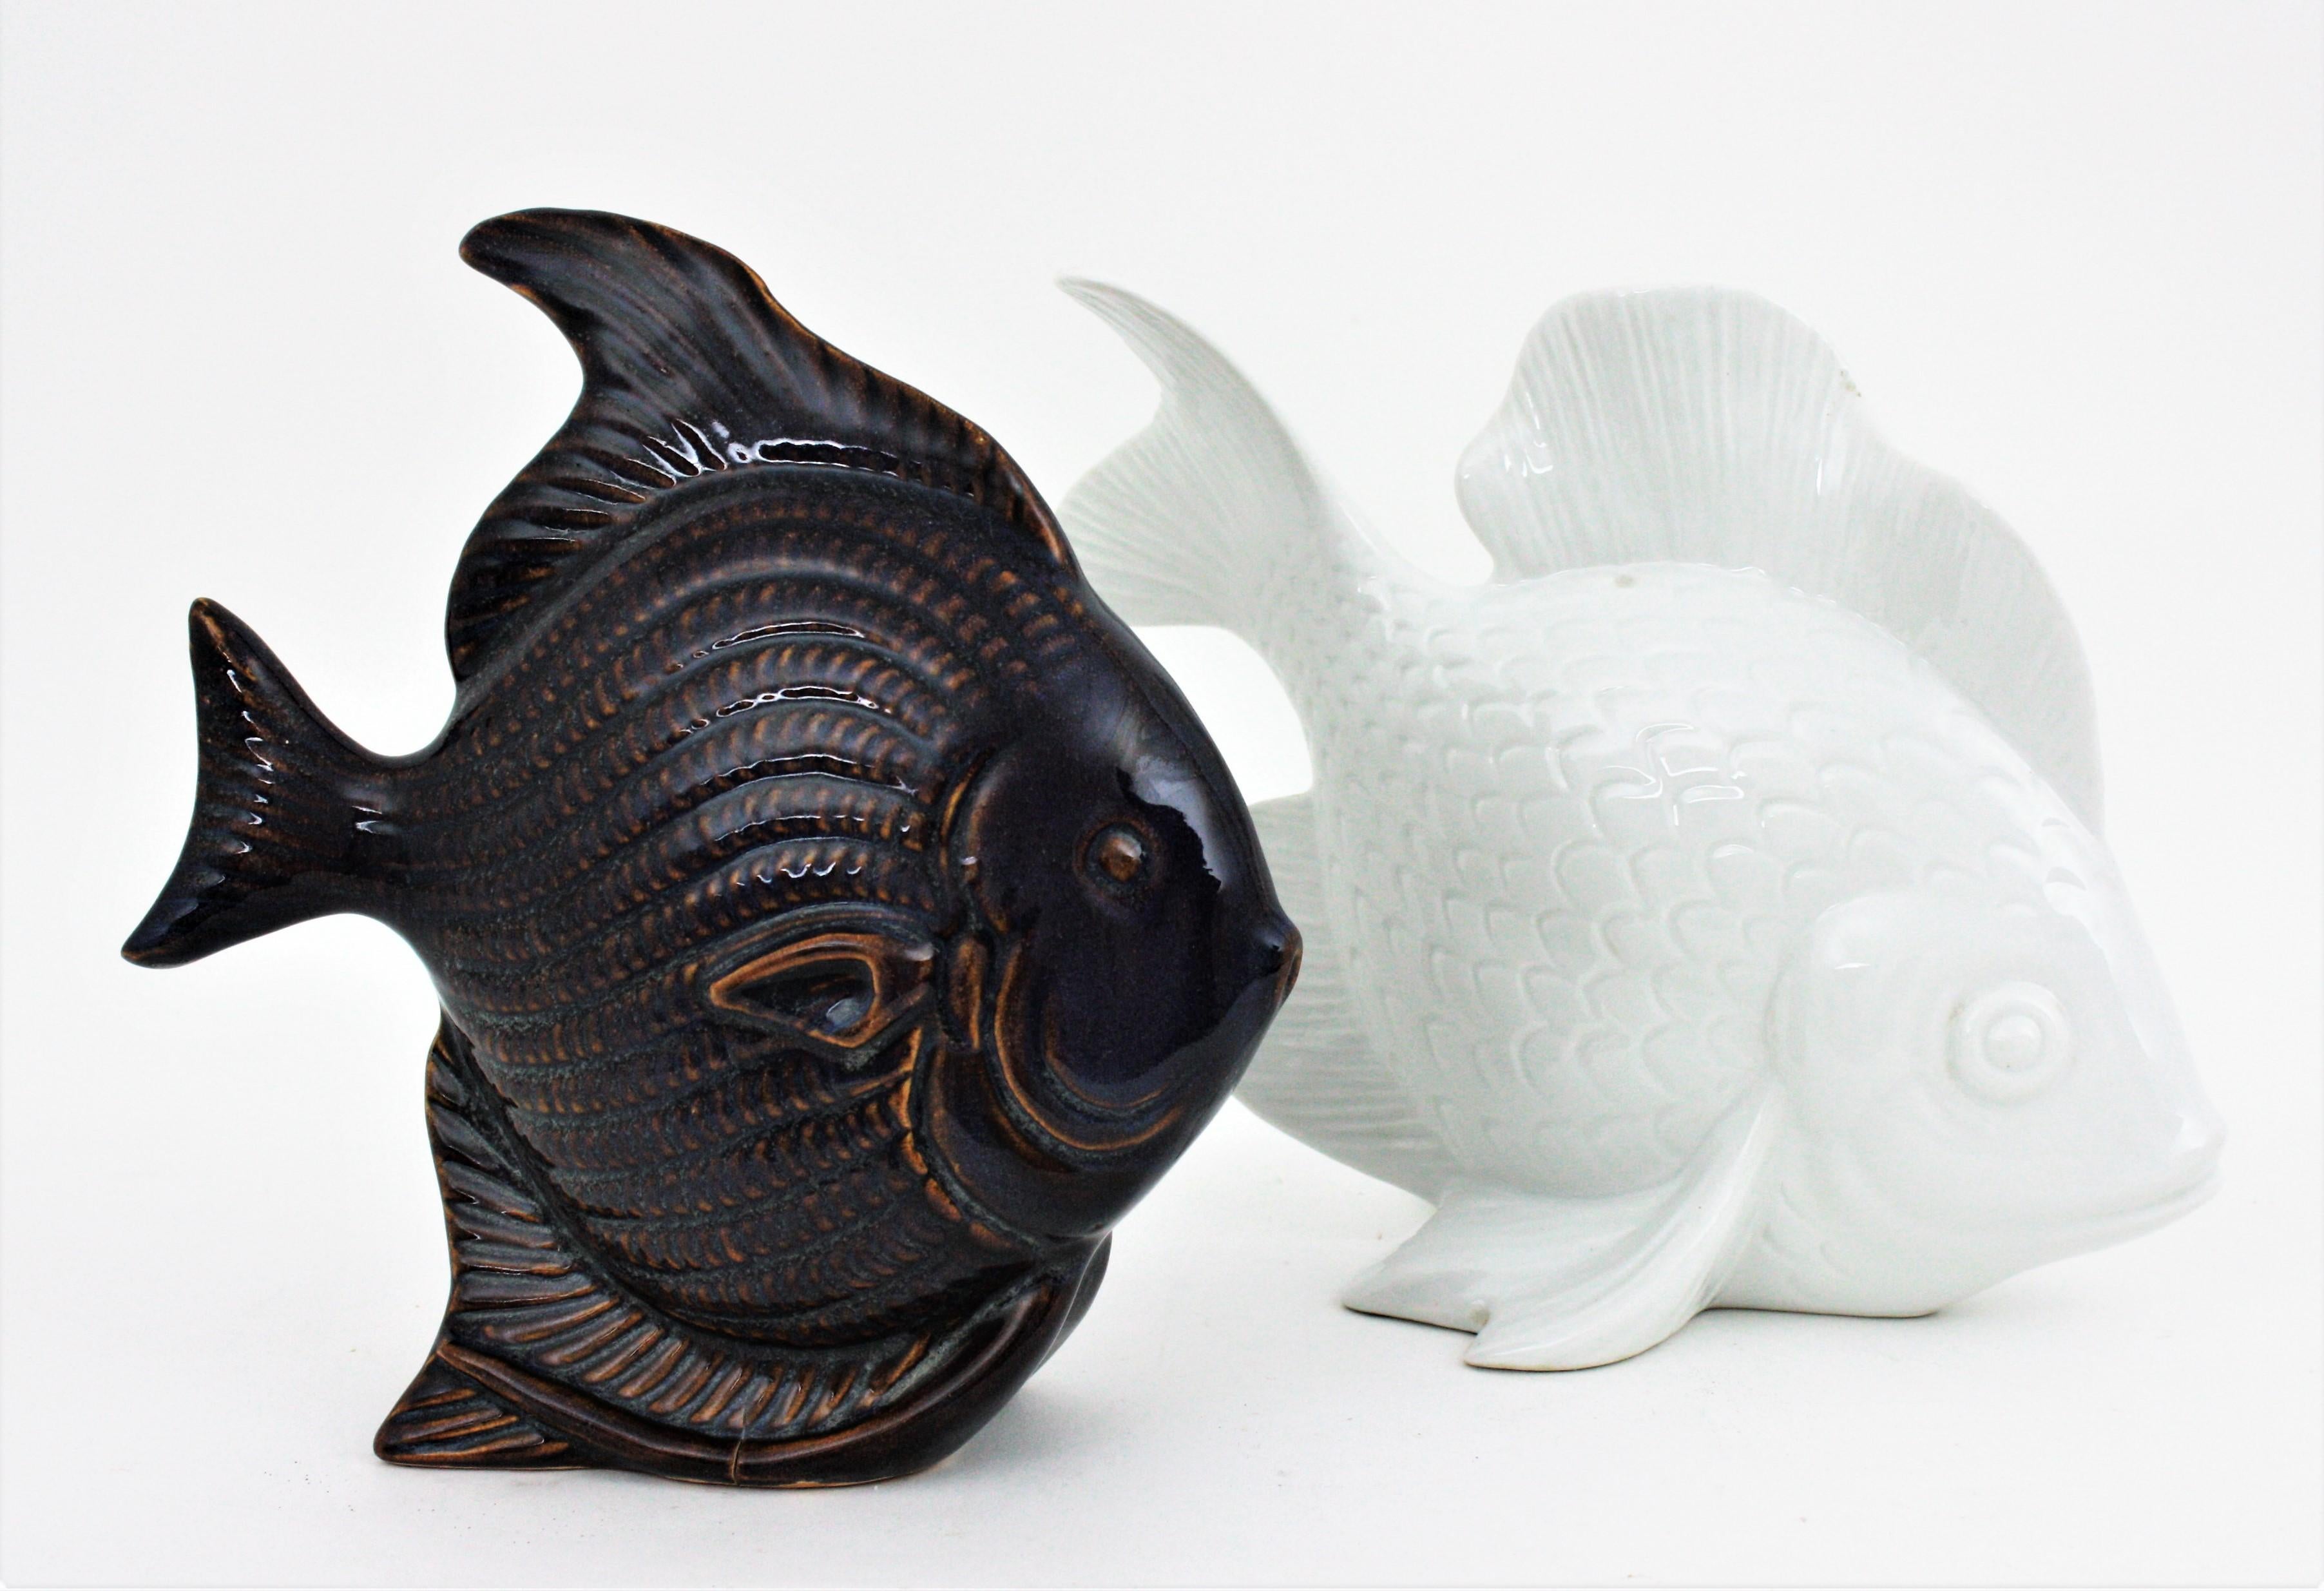 Set of Two Mid-Century Modern ceramic and porcelain fish Figures in cobalt blue and white. Spain, 1950s-1960s.
Unmatching glazed fish sculptures highly decorative placed together.
The cobalt blue one is made in glazed ceramic with accents in